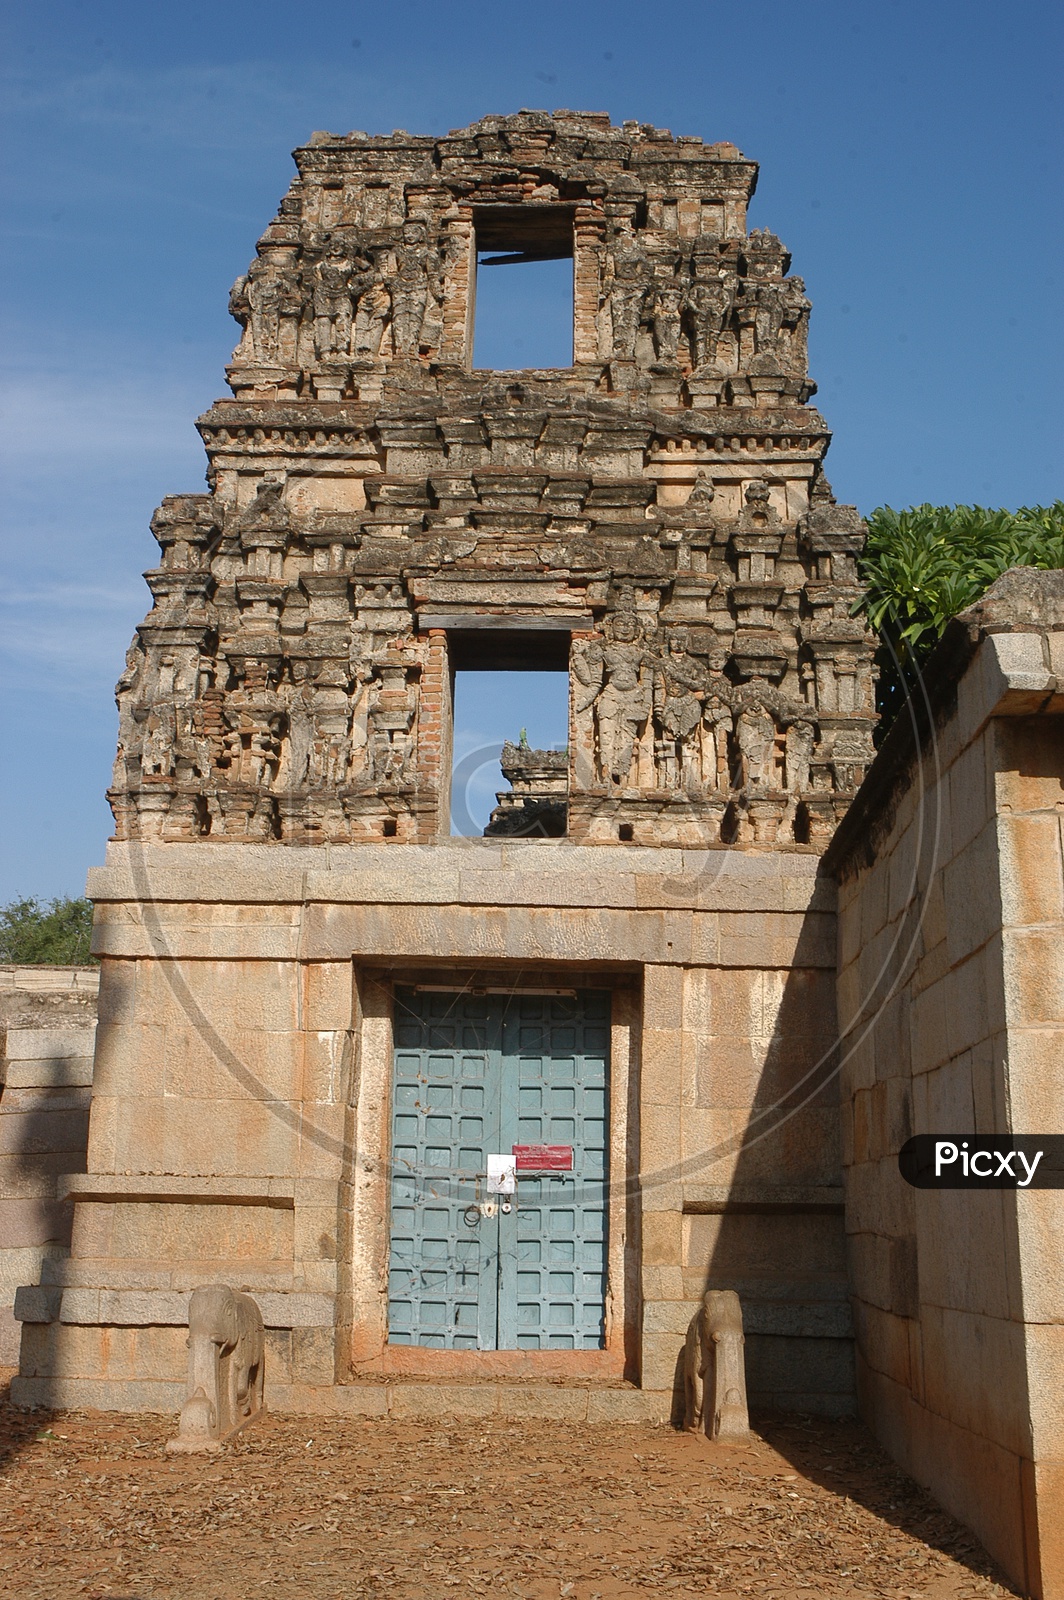 Old Ruins Of An Ancient Hindu Temple